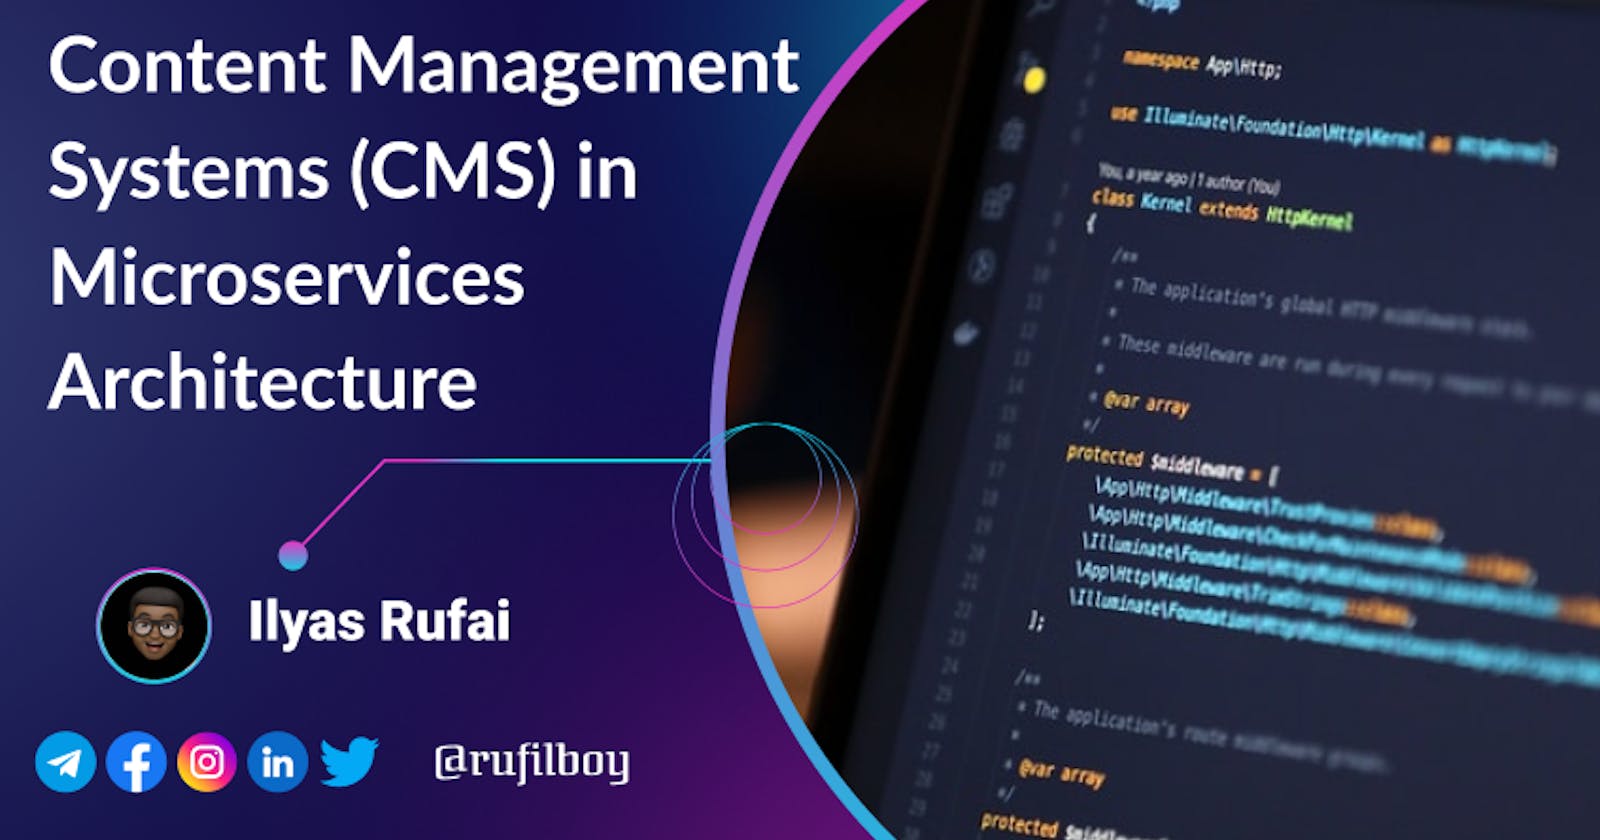 Day 81 -Content Management Systems (CMS) in Microservices Architecture